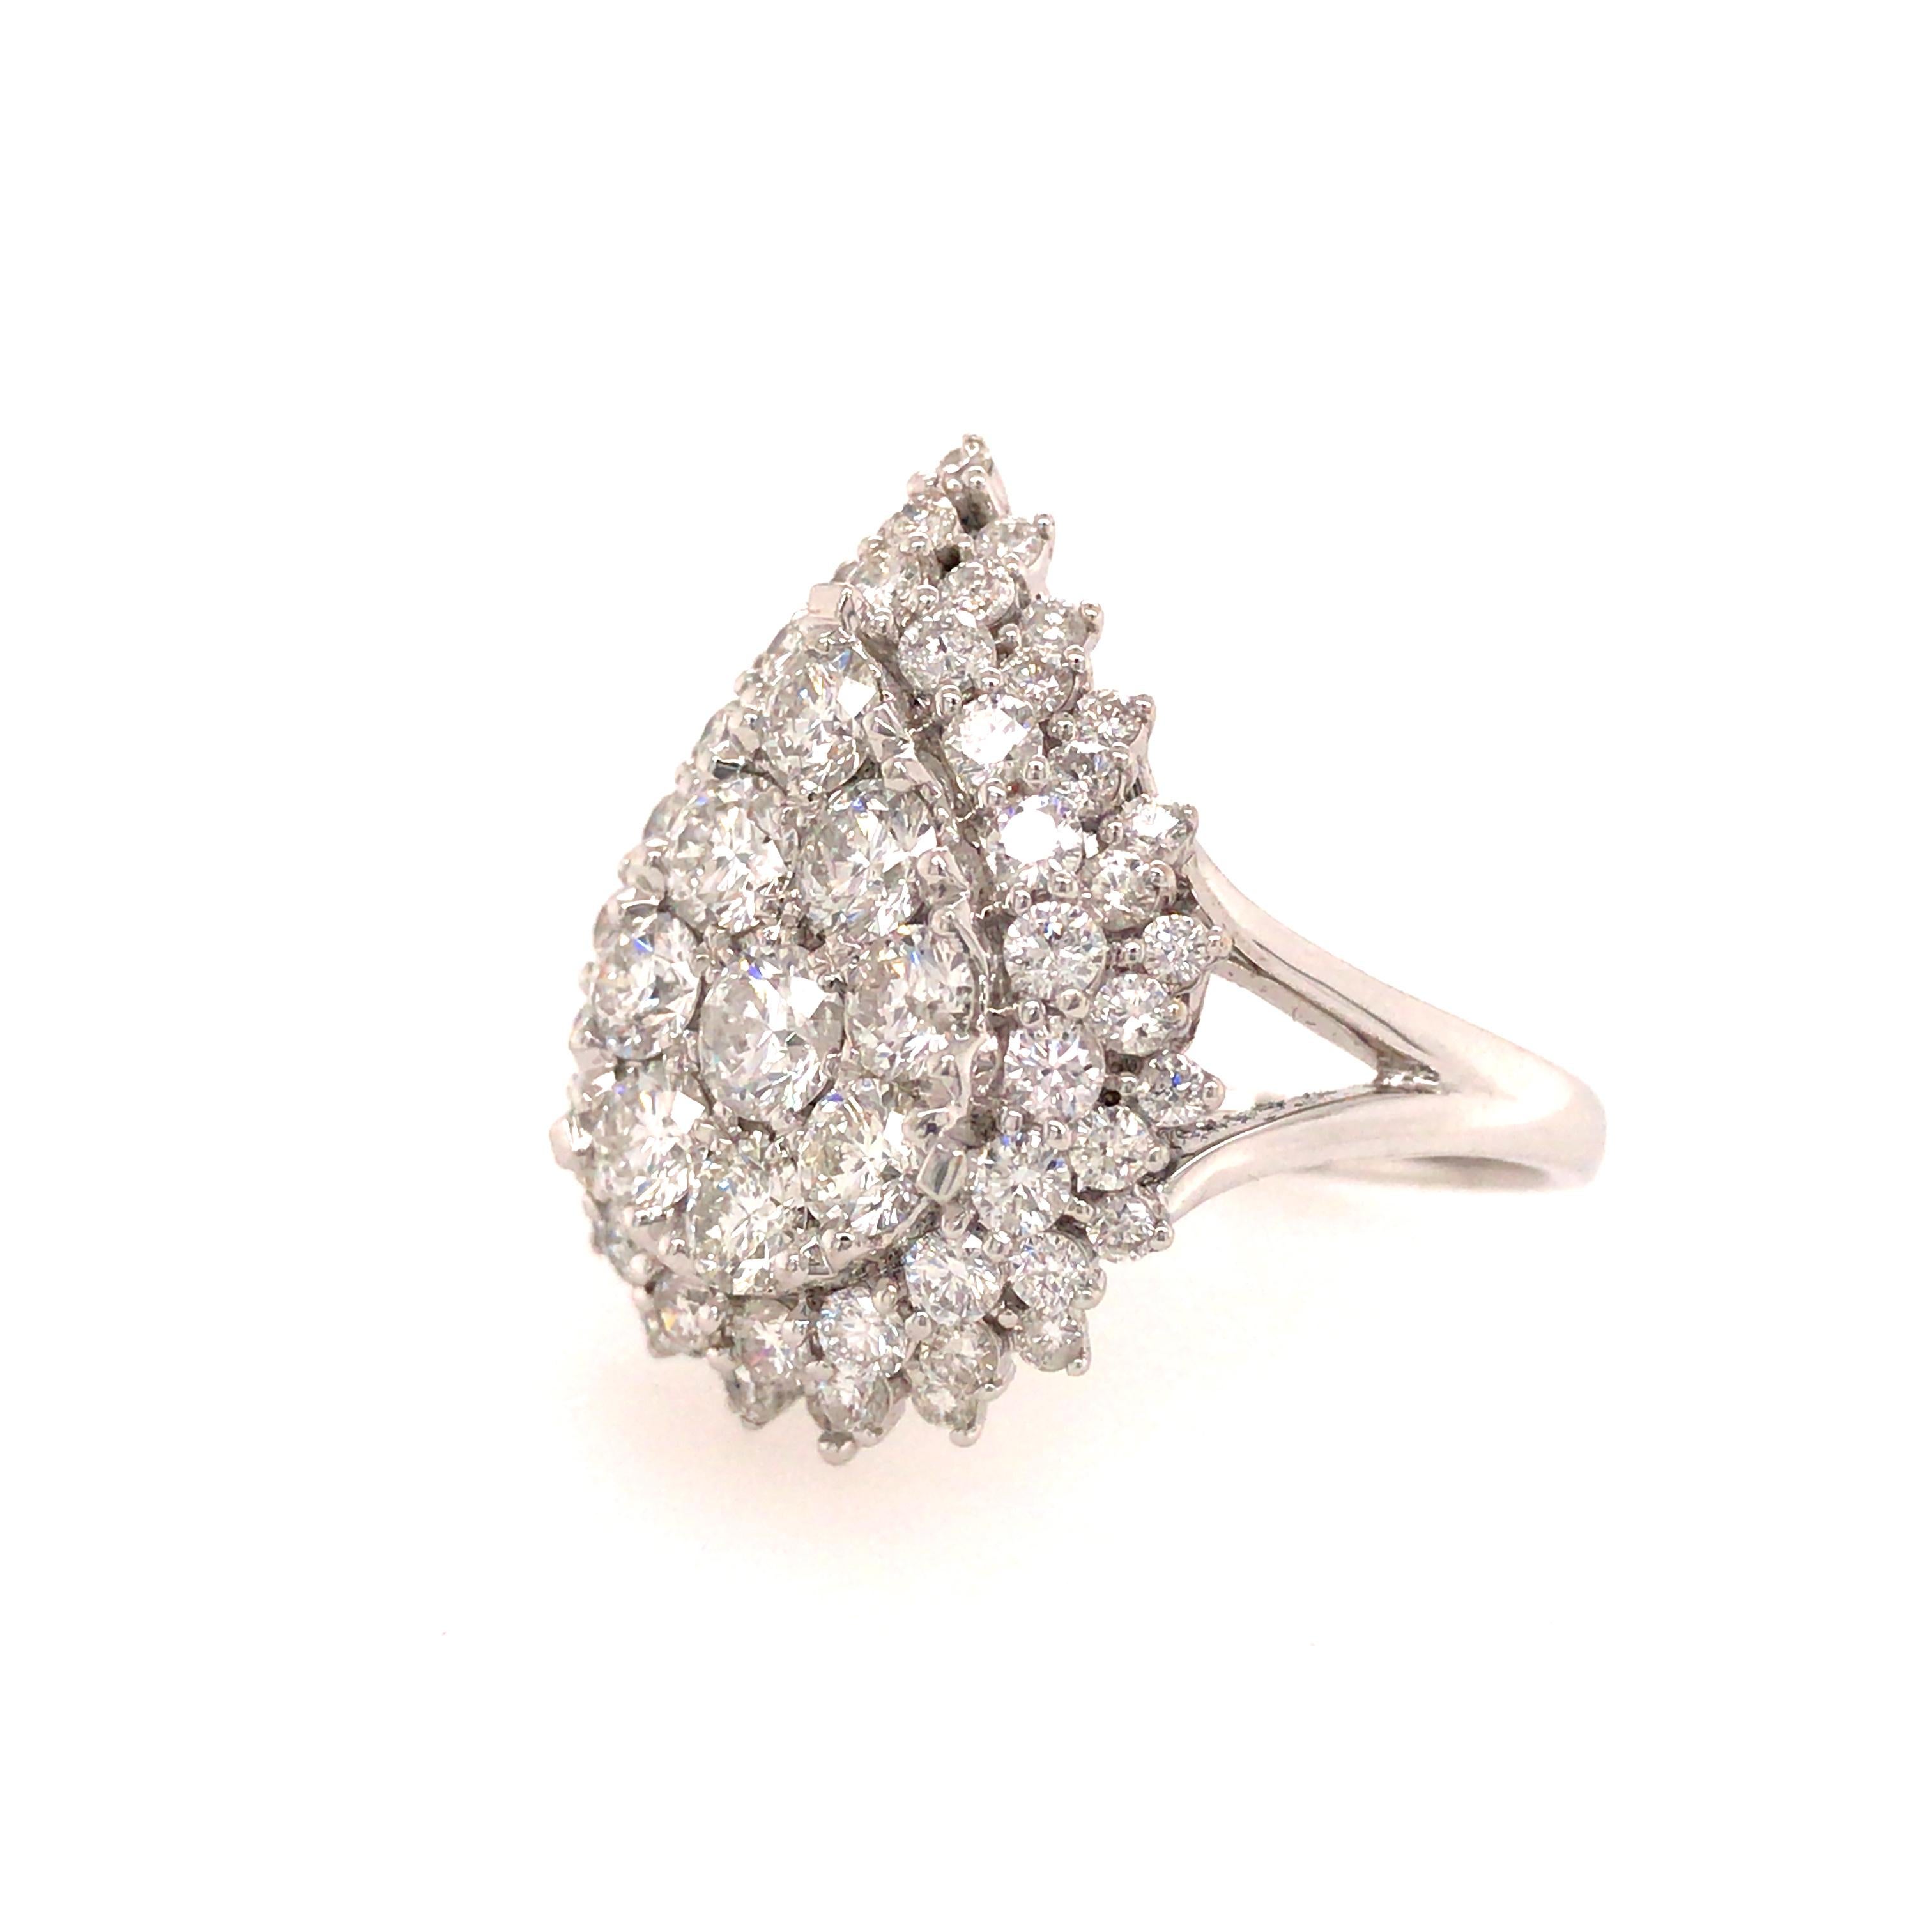 Pear Shape Diamond Cluster Ring in 18K White Gold.  (66) Round Brilliant Cut Diamonds weighing 2.75 carat total weight, G-H in color and VS-SI in clarity are expertly set.  The Ring measures 1 inch in length and 11/16 inch in width at the widest